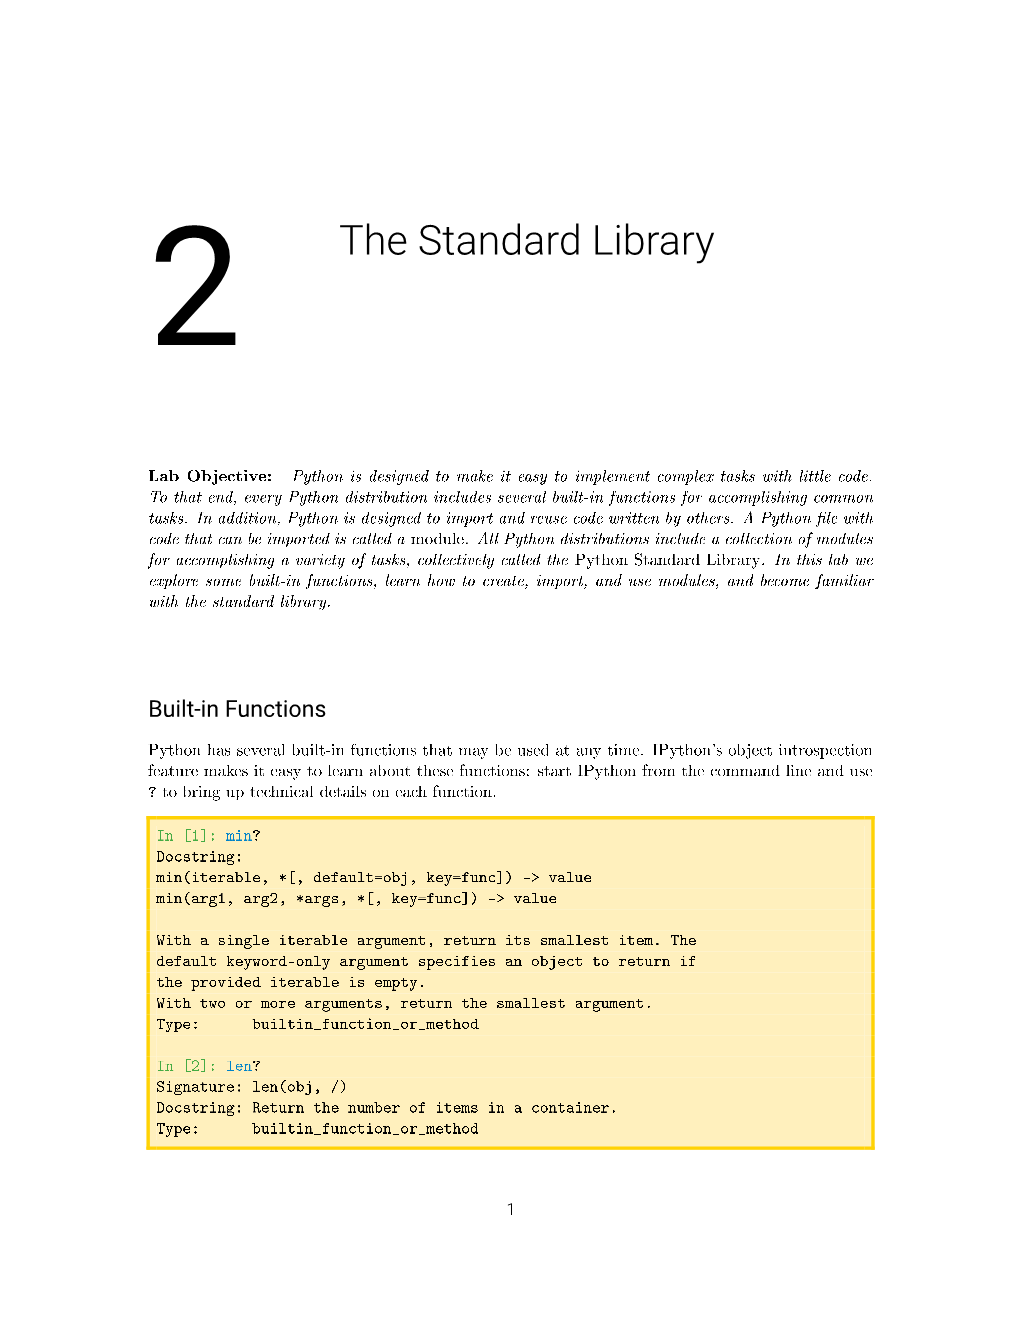 The Standard Library